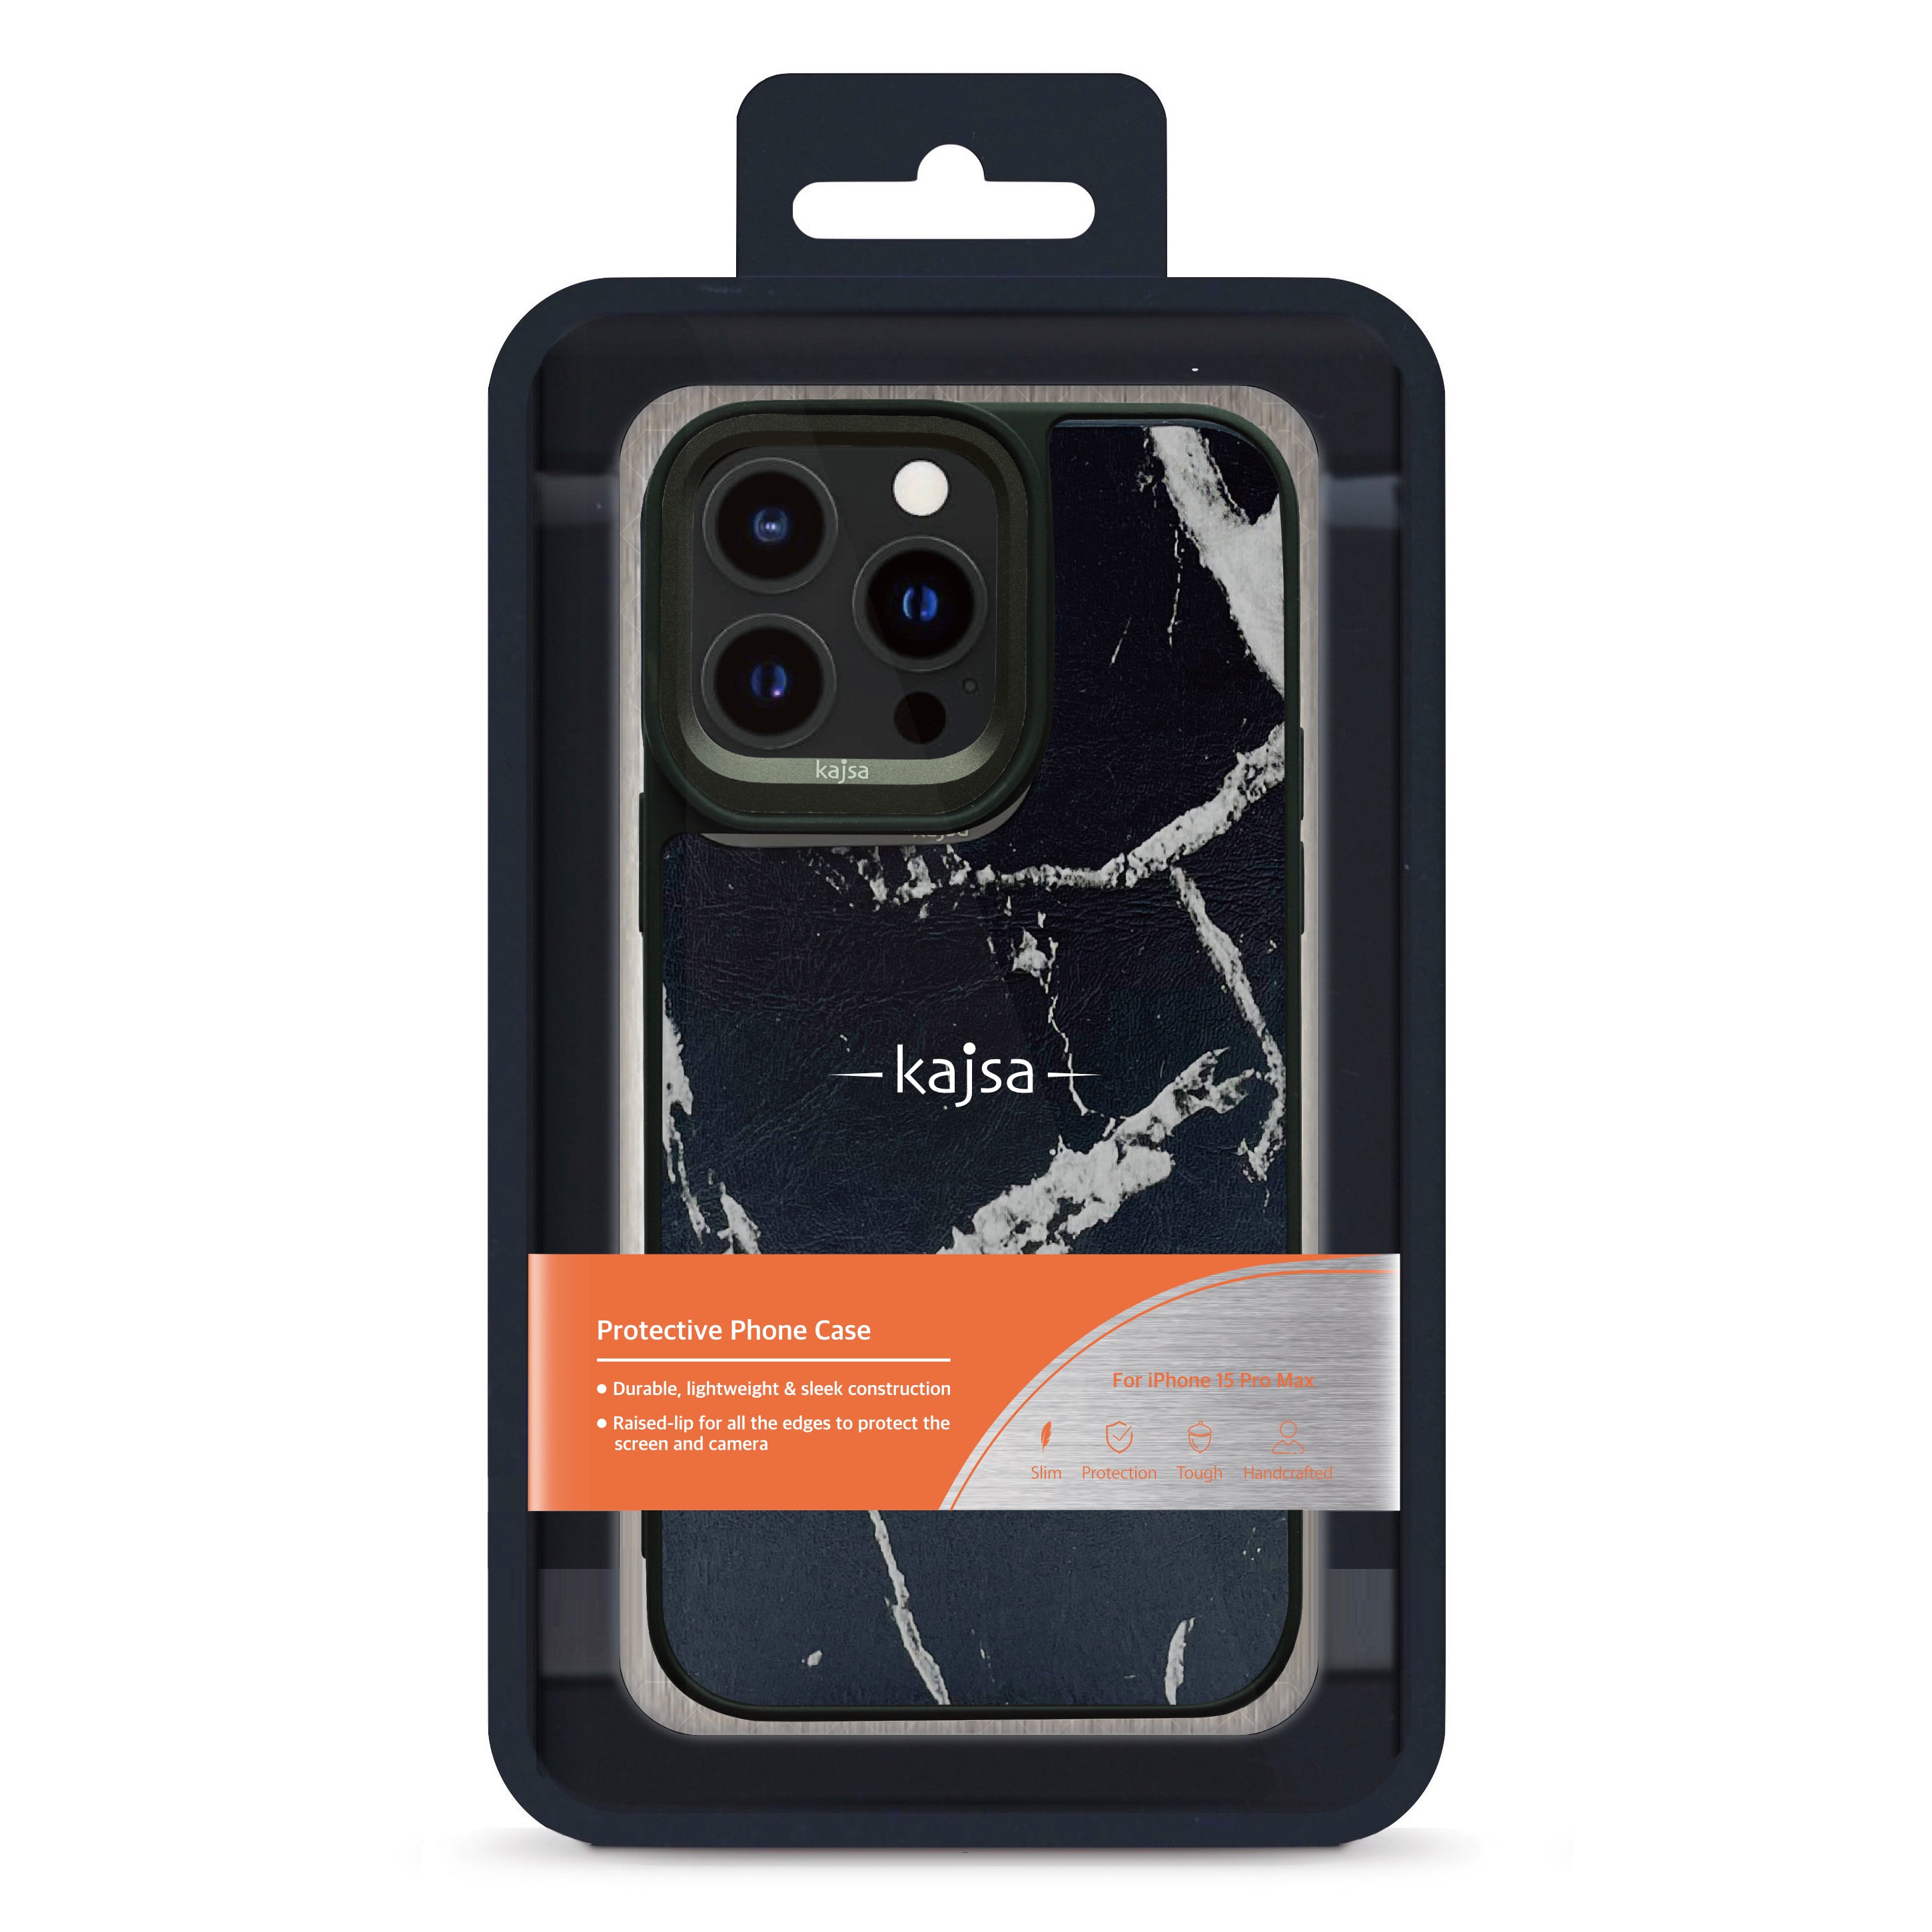 Preppie Collection - Marble PU Back Case for iPhone 15